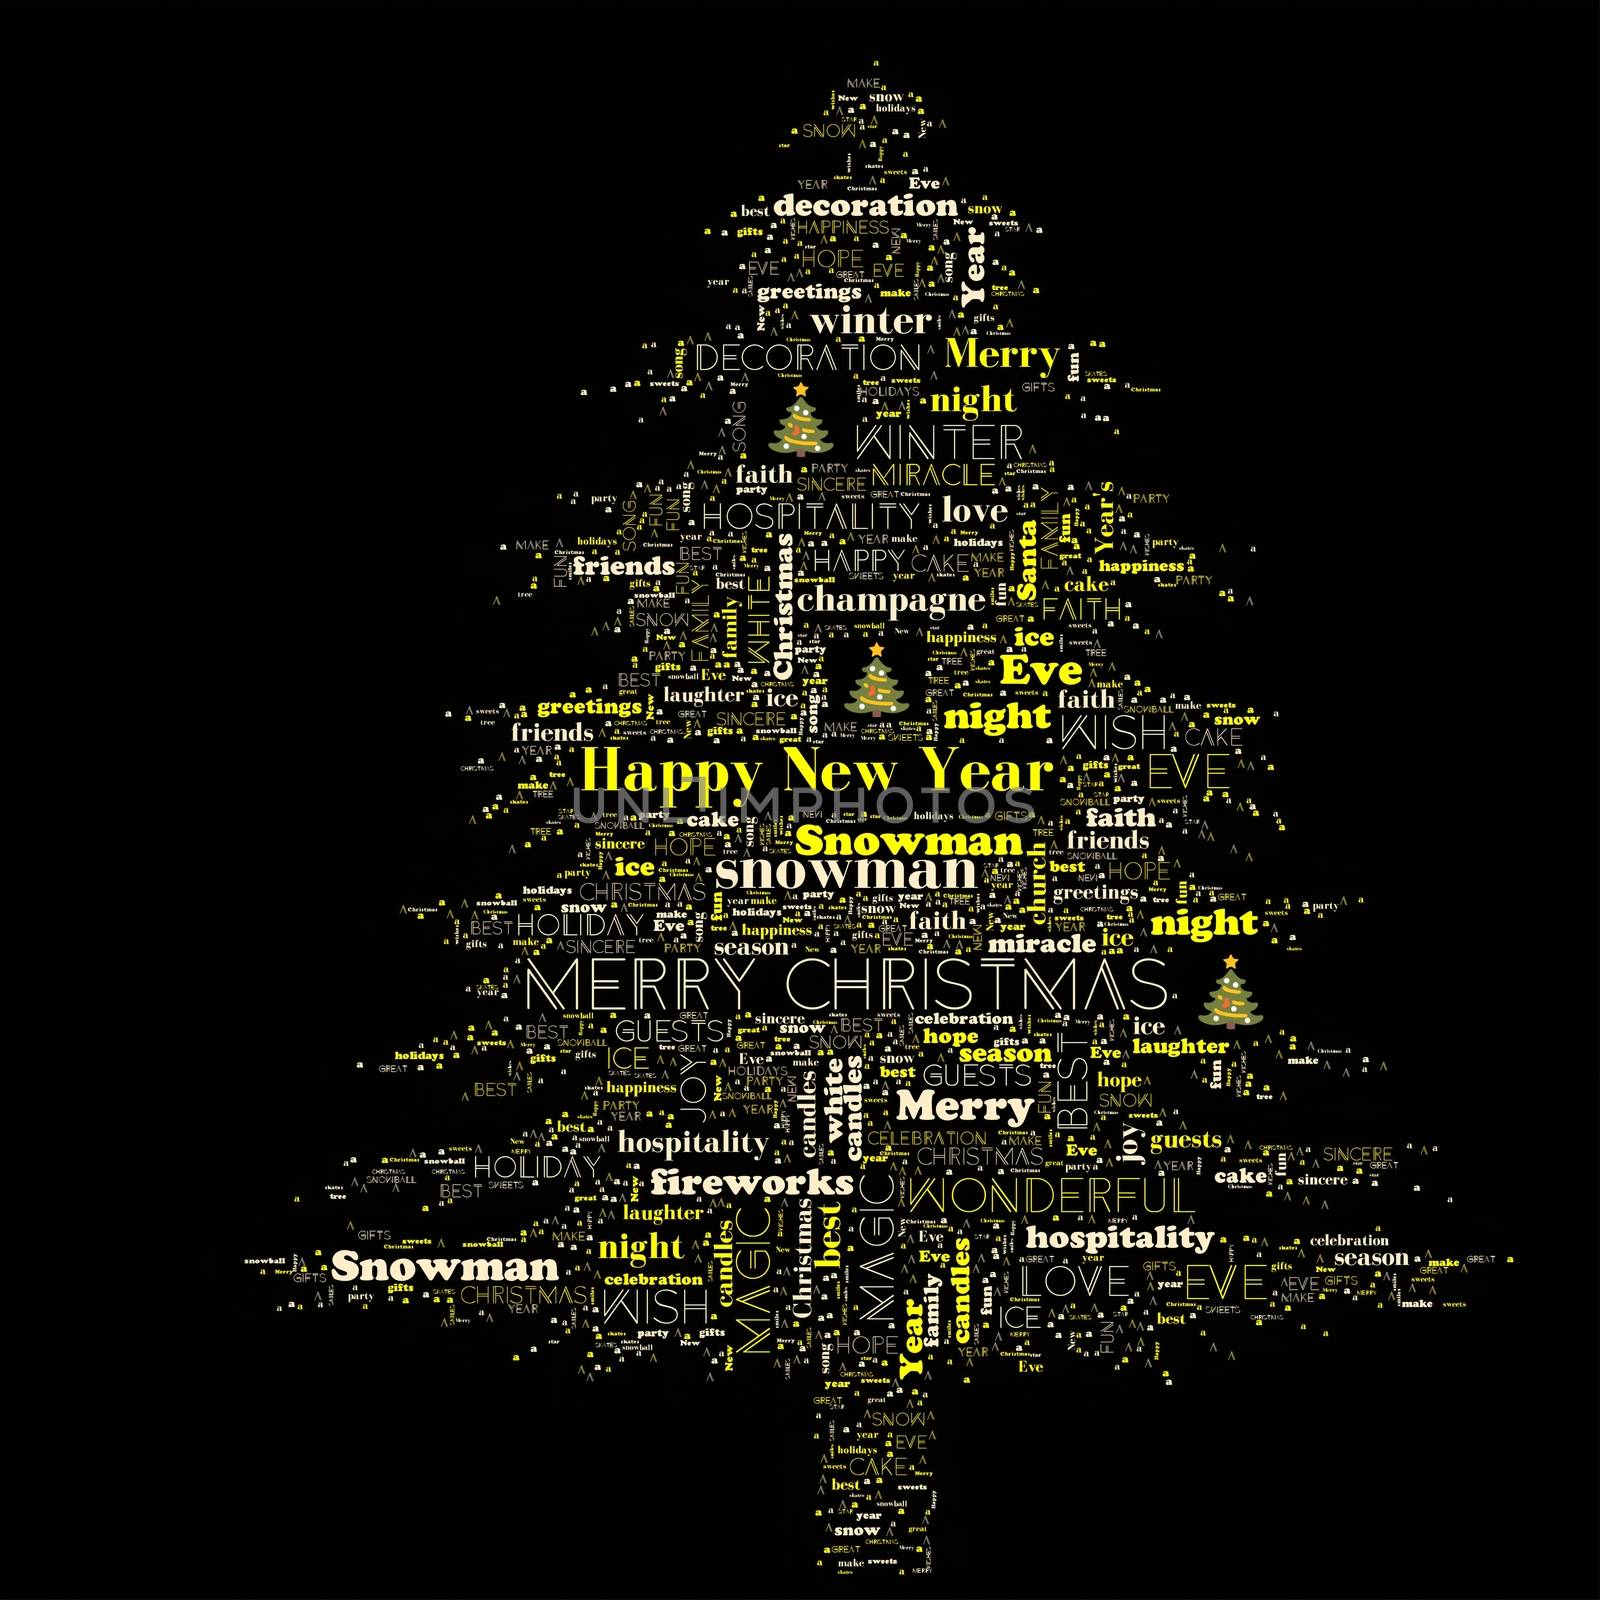 Merry Christmas word cloud in tree shape by artush